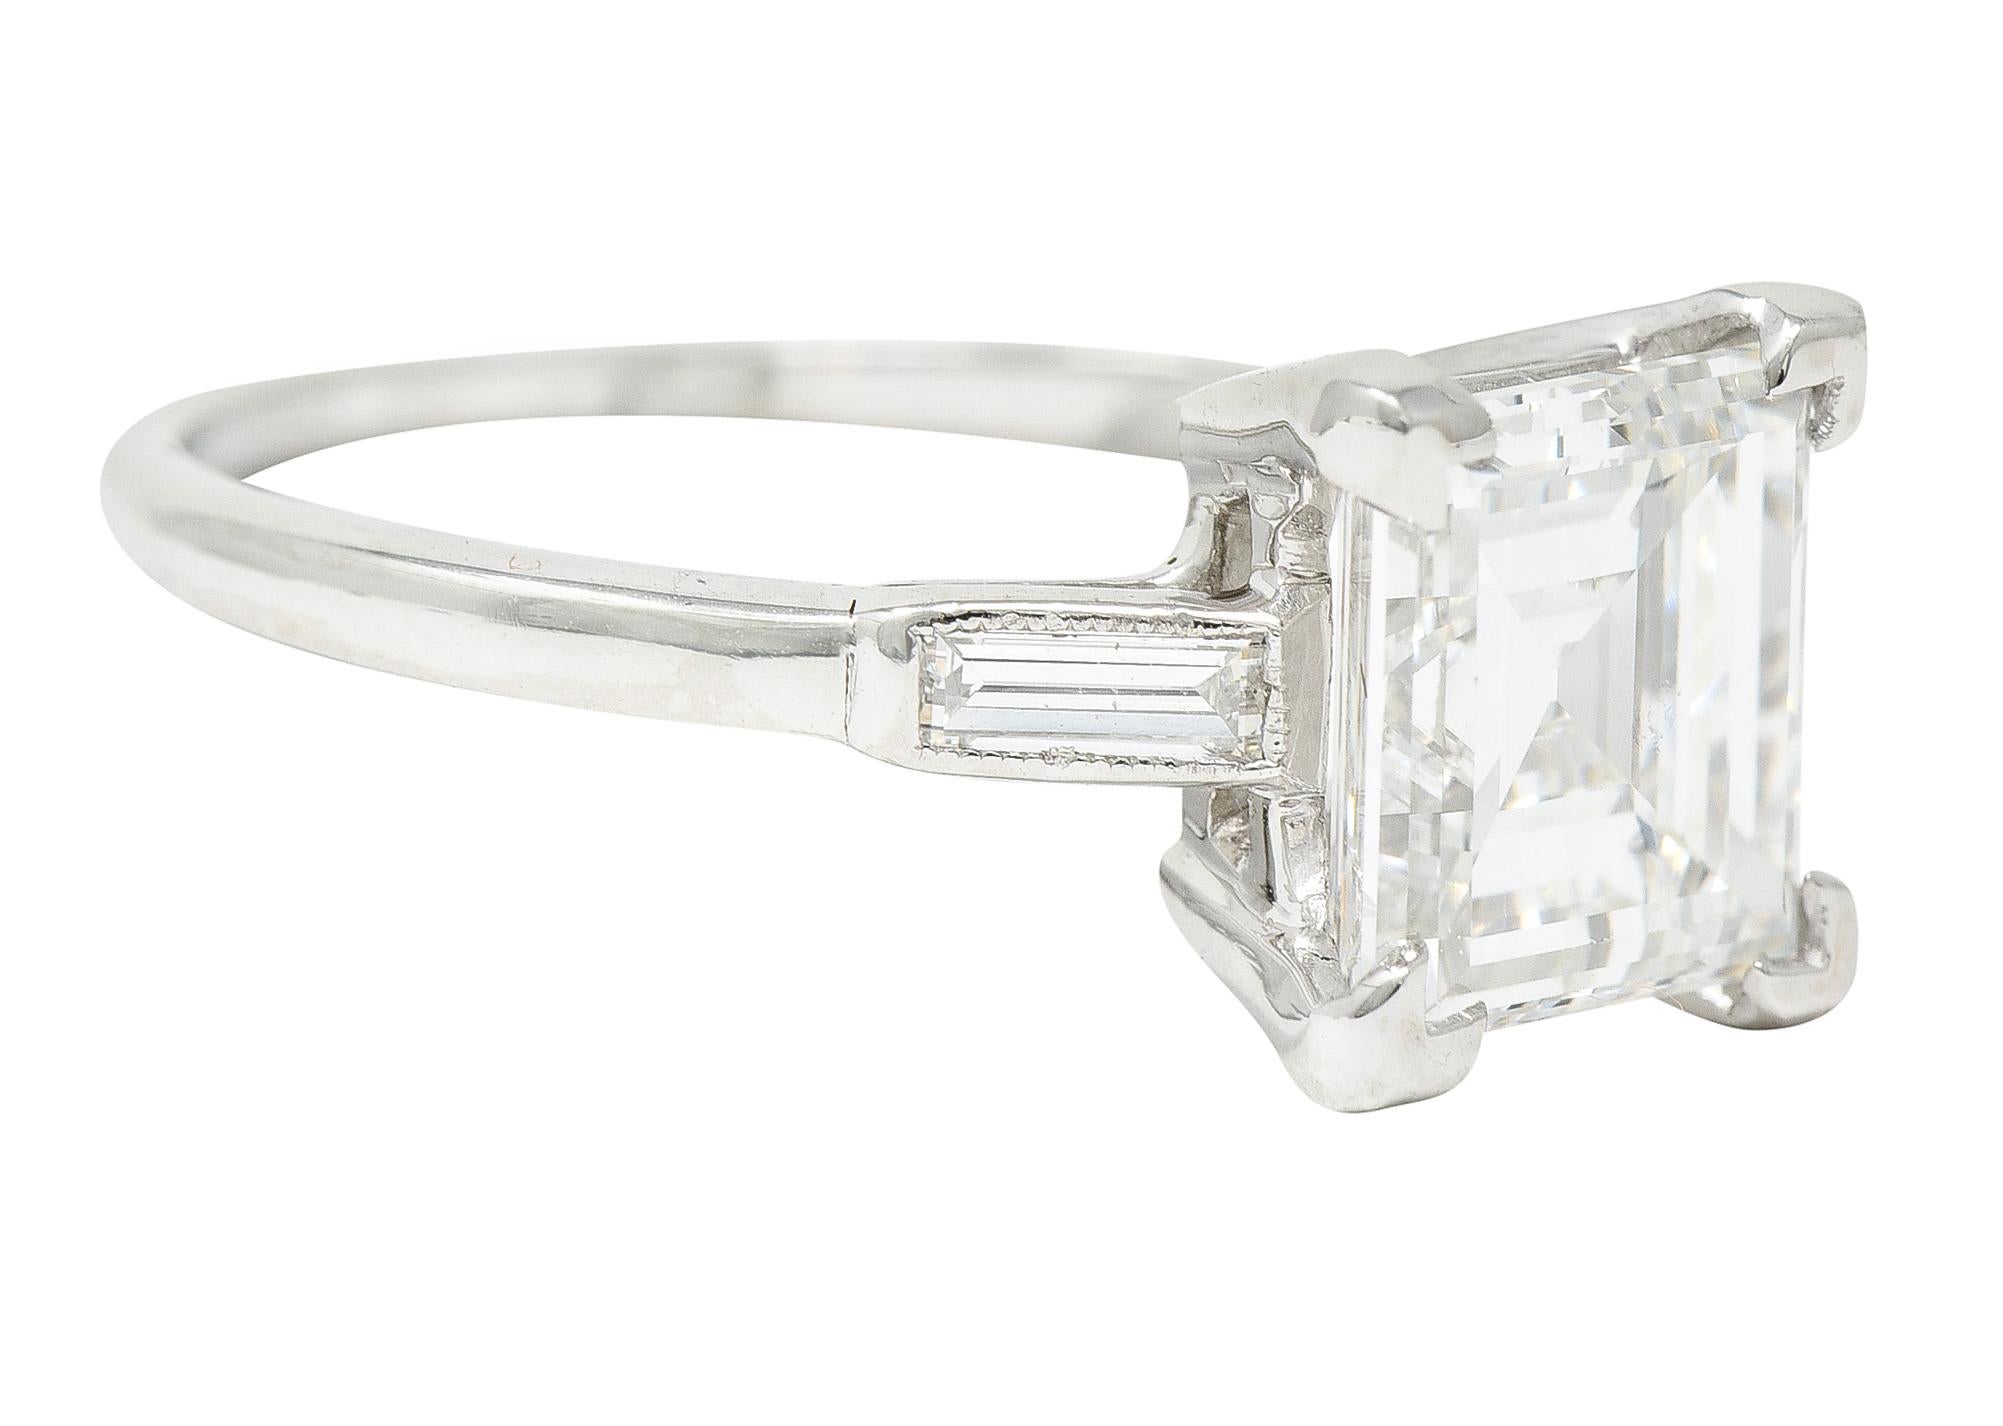 Featuring a square step cut diamond weighing 2.56 carats - D color with VS1 clarity. Basket set with V prongs and flanked by subtle cathedral shoulders. Flush set with straight baguette cut diamonds weighing in total approximately 0.22 carat - eye